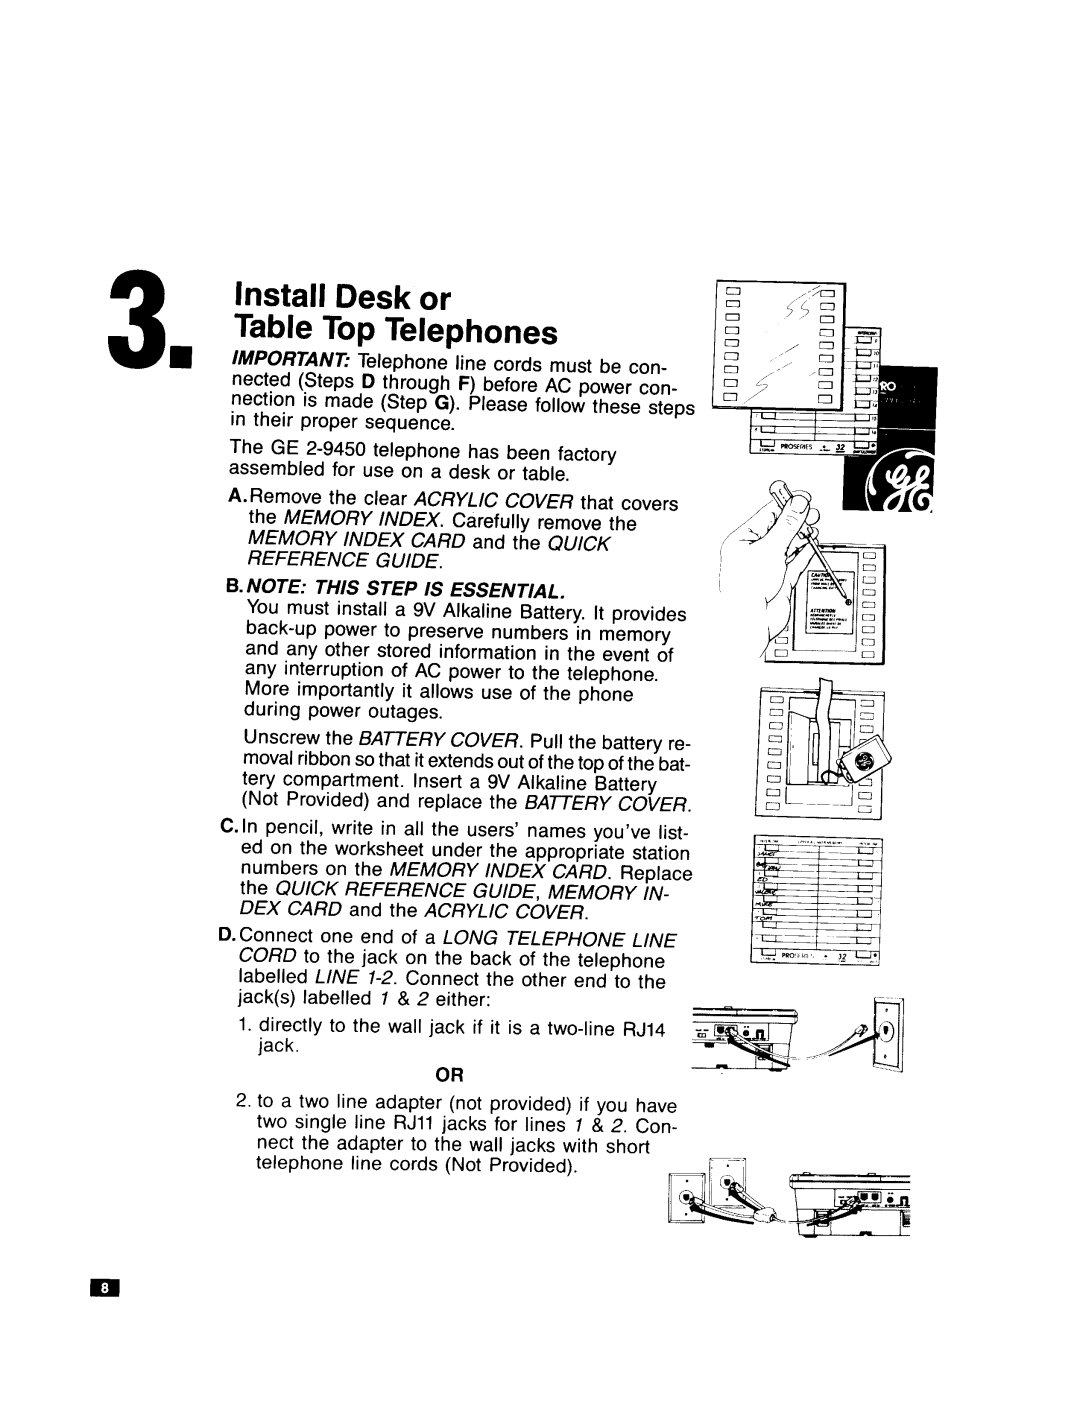 GE Feb-50 installation instructions Install Desk or 3. Table Top Telephones, B. Note, This Step Is Essential, 9-41 